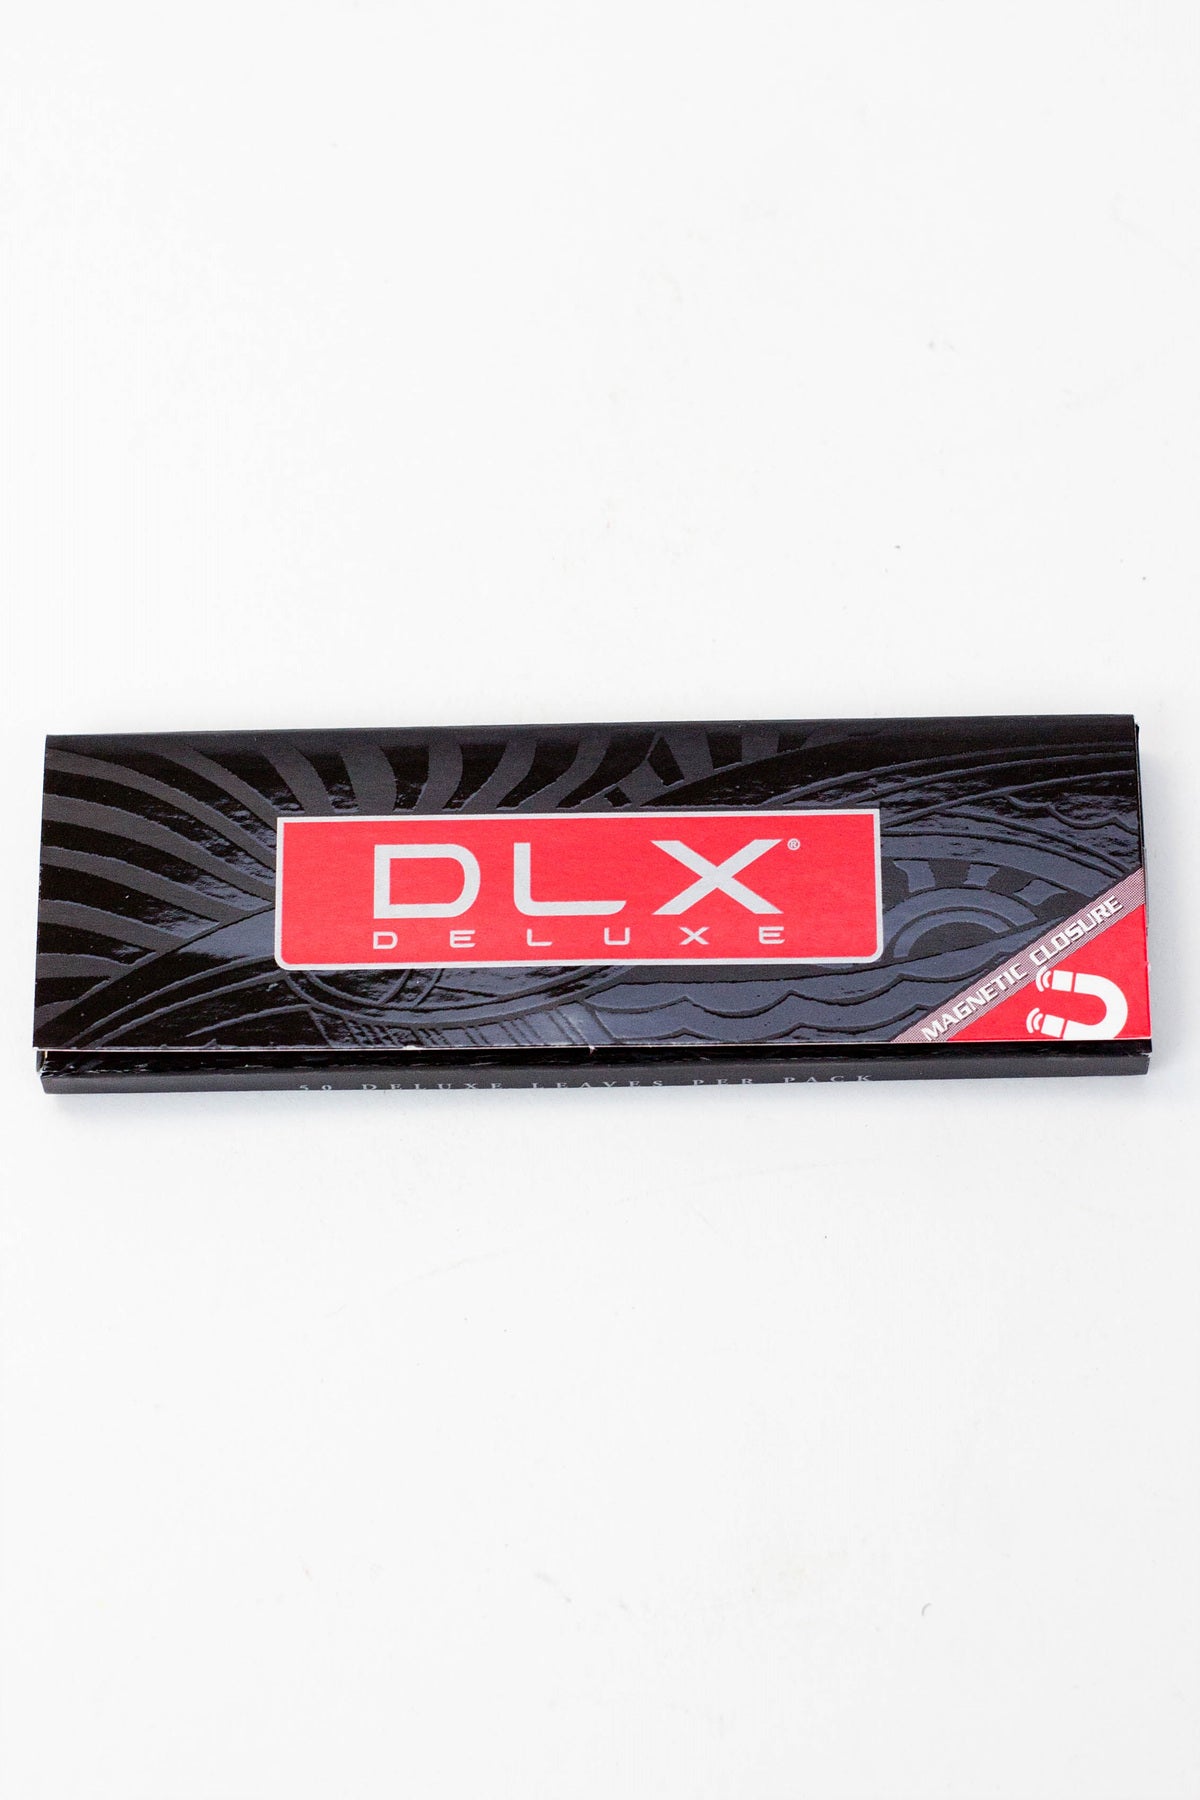 DLX deluxe Rolling Papers 1 1/4_2